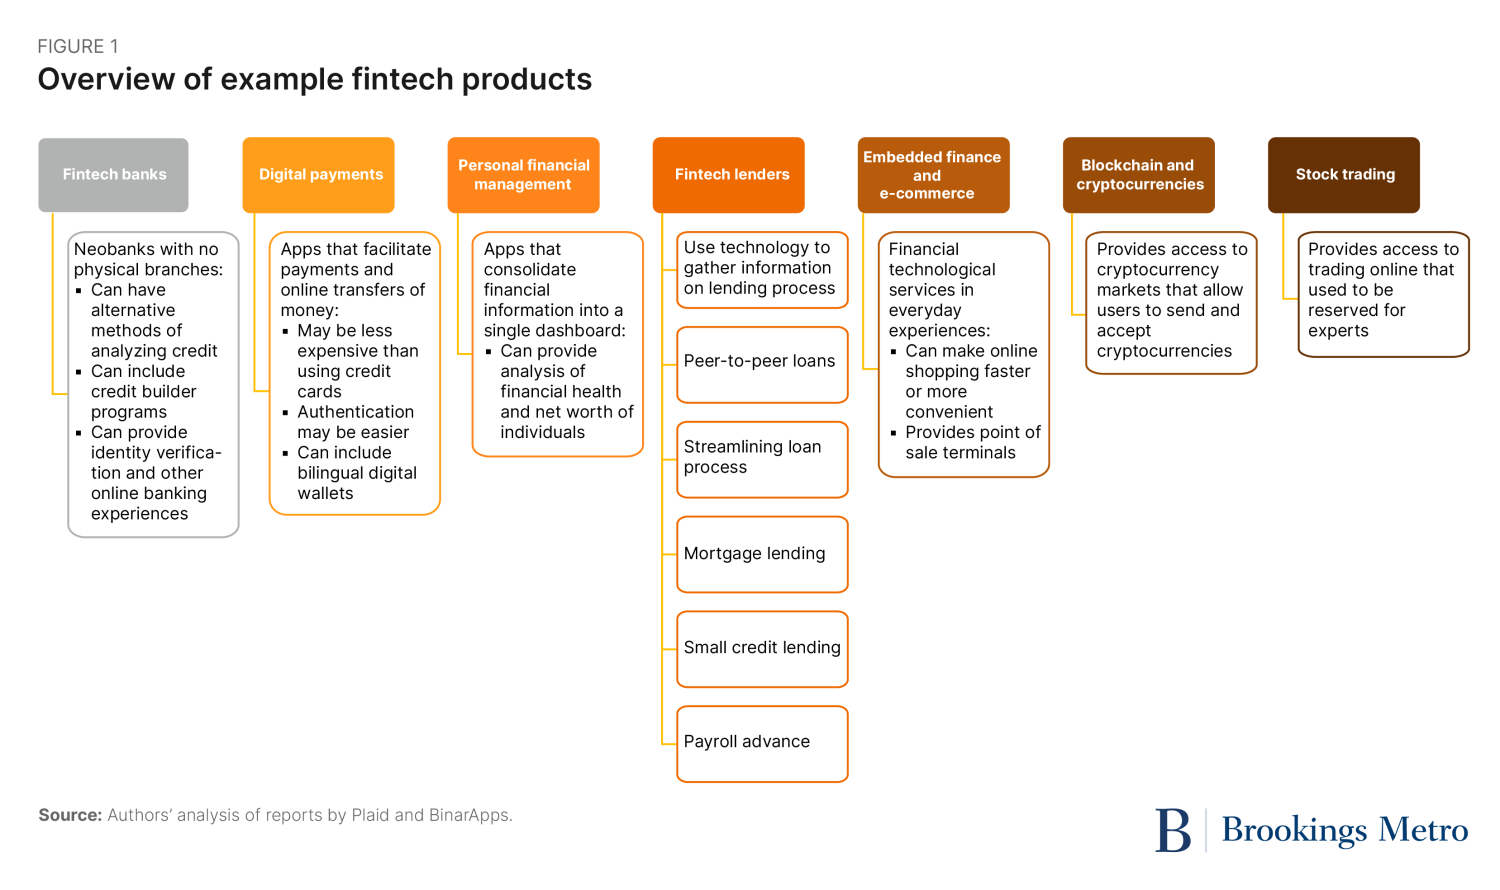 Figure 1. Overview of example fintech products